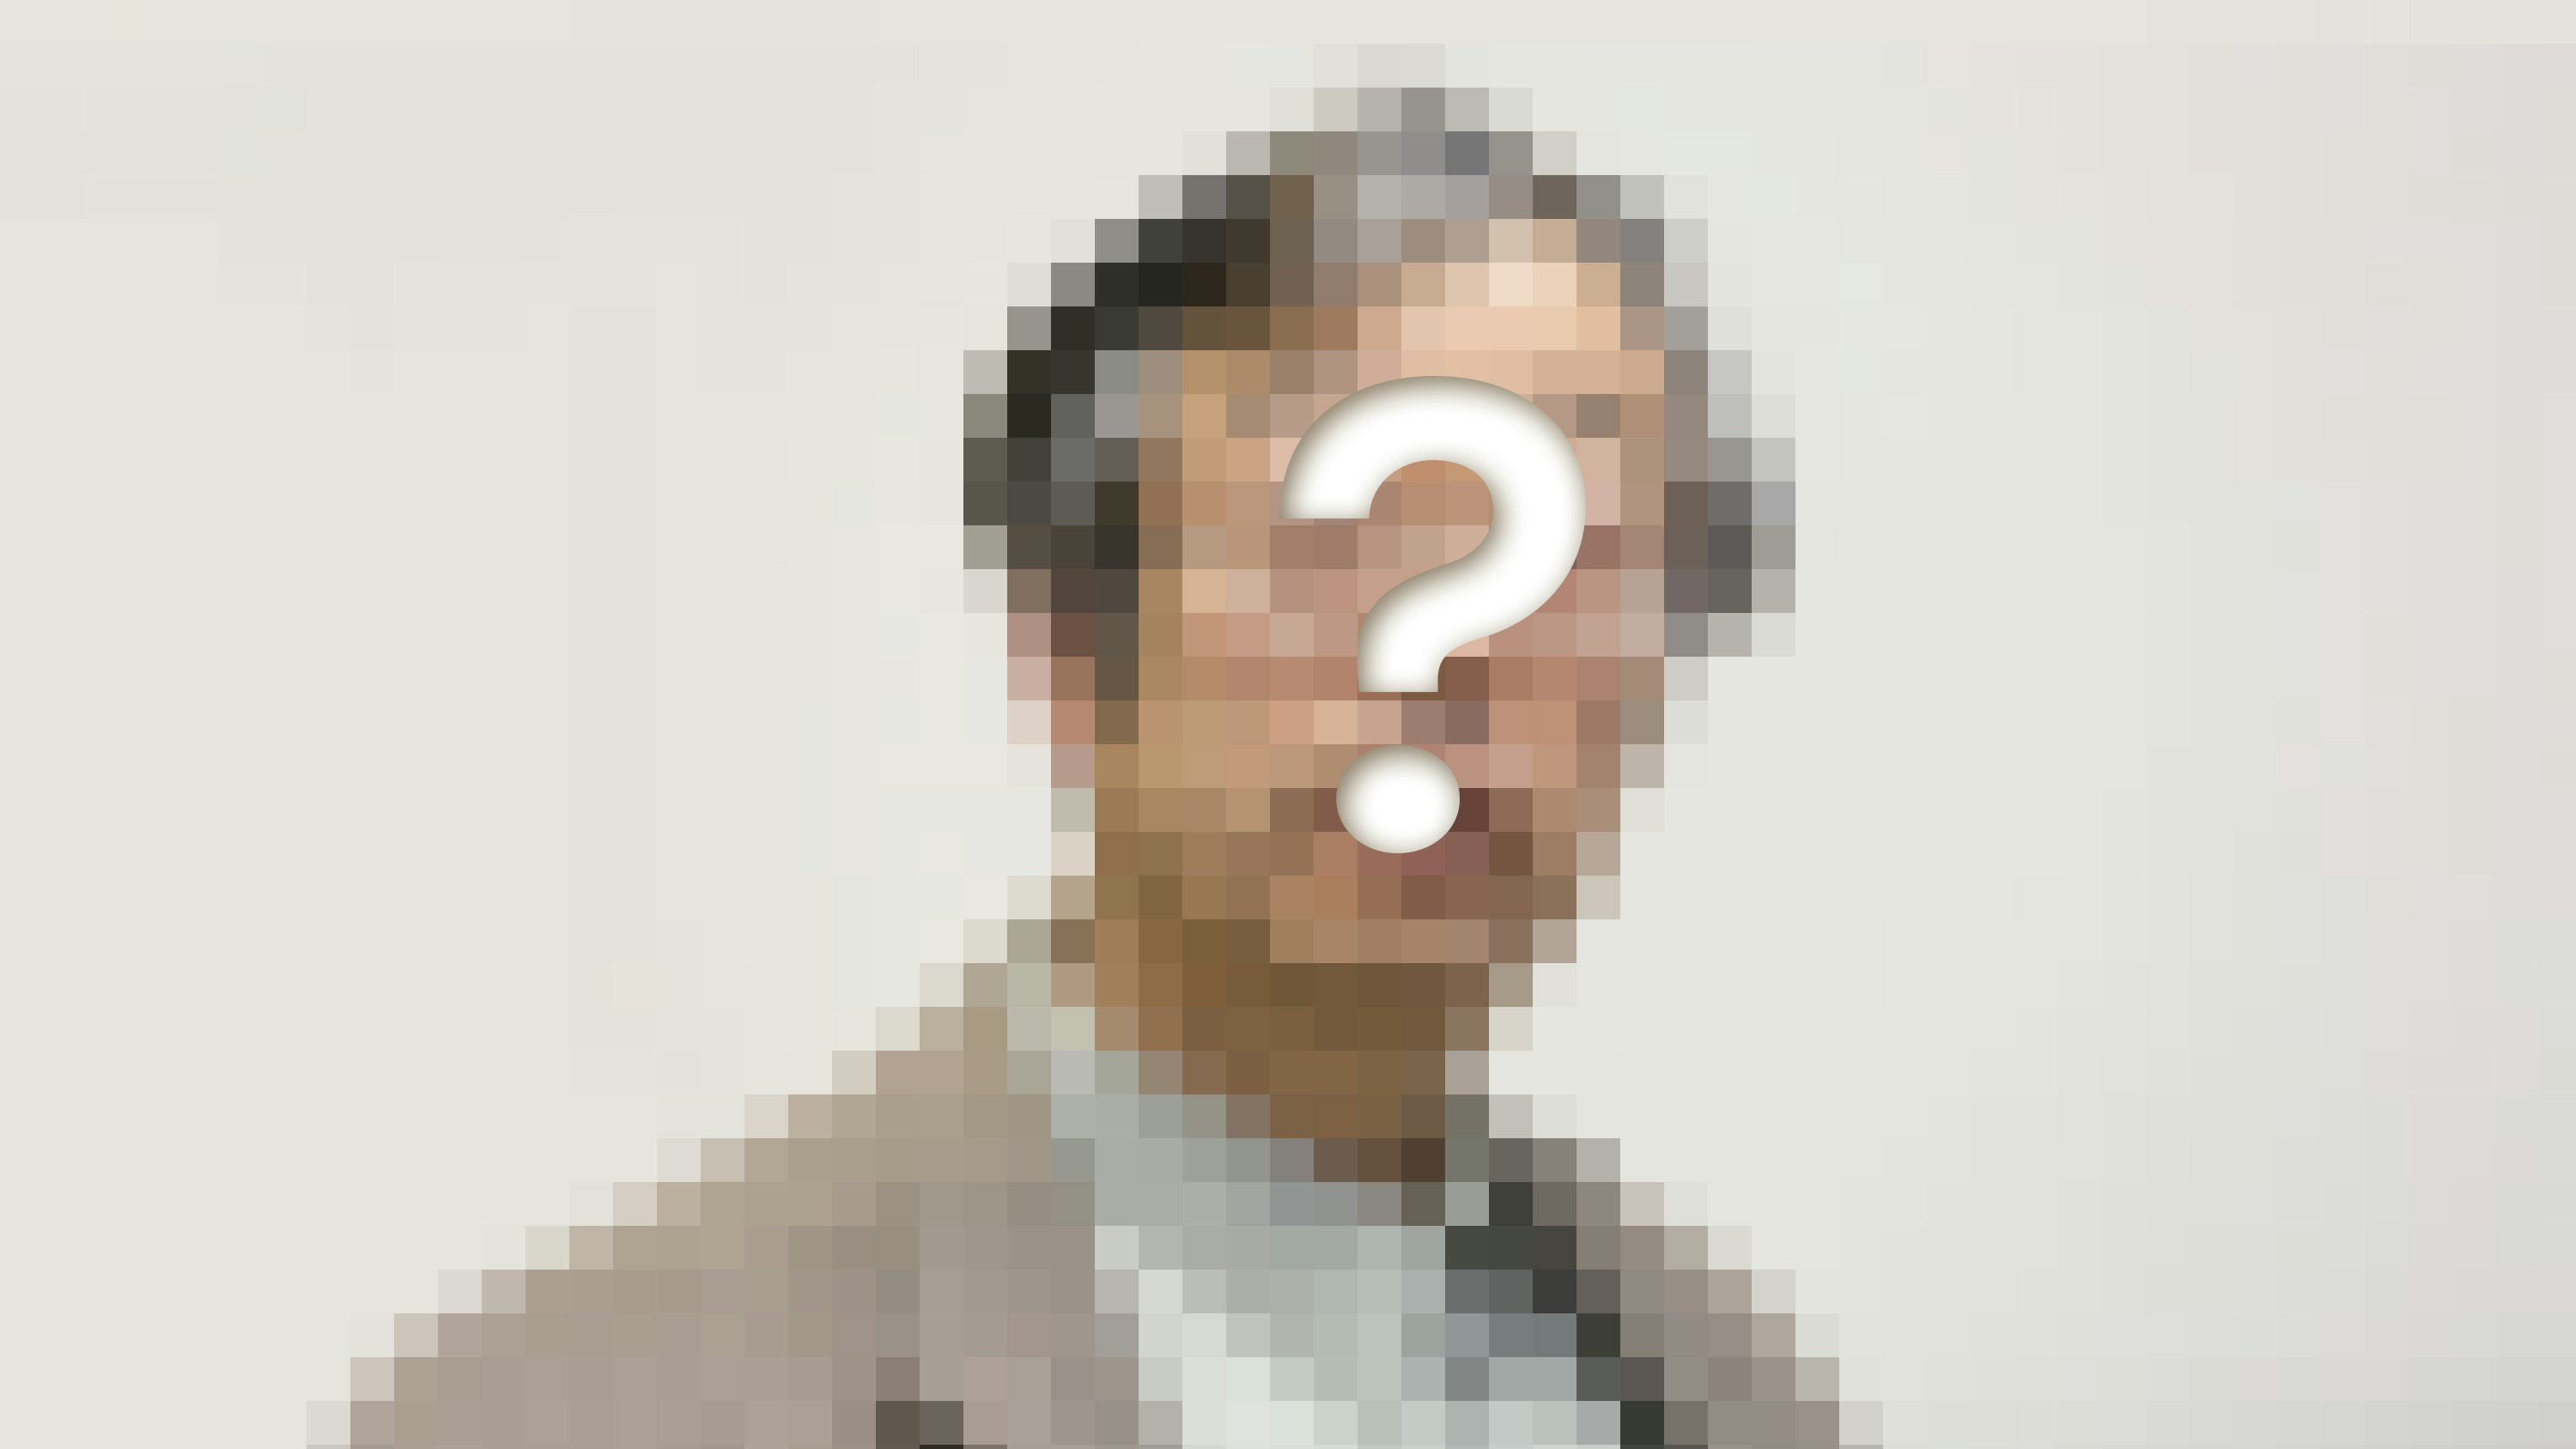 pixelated photograph of man with graying hair and tan blazer with question mark superimposed over the man's face